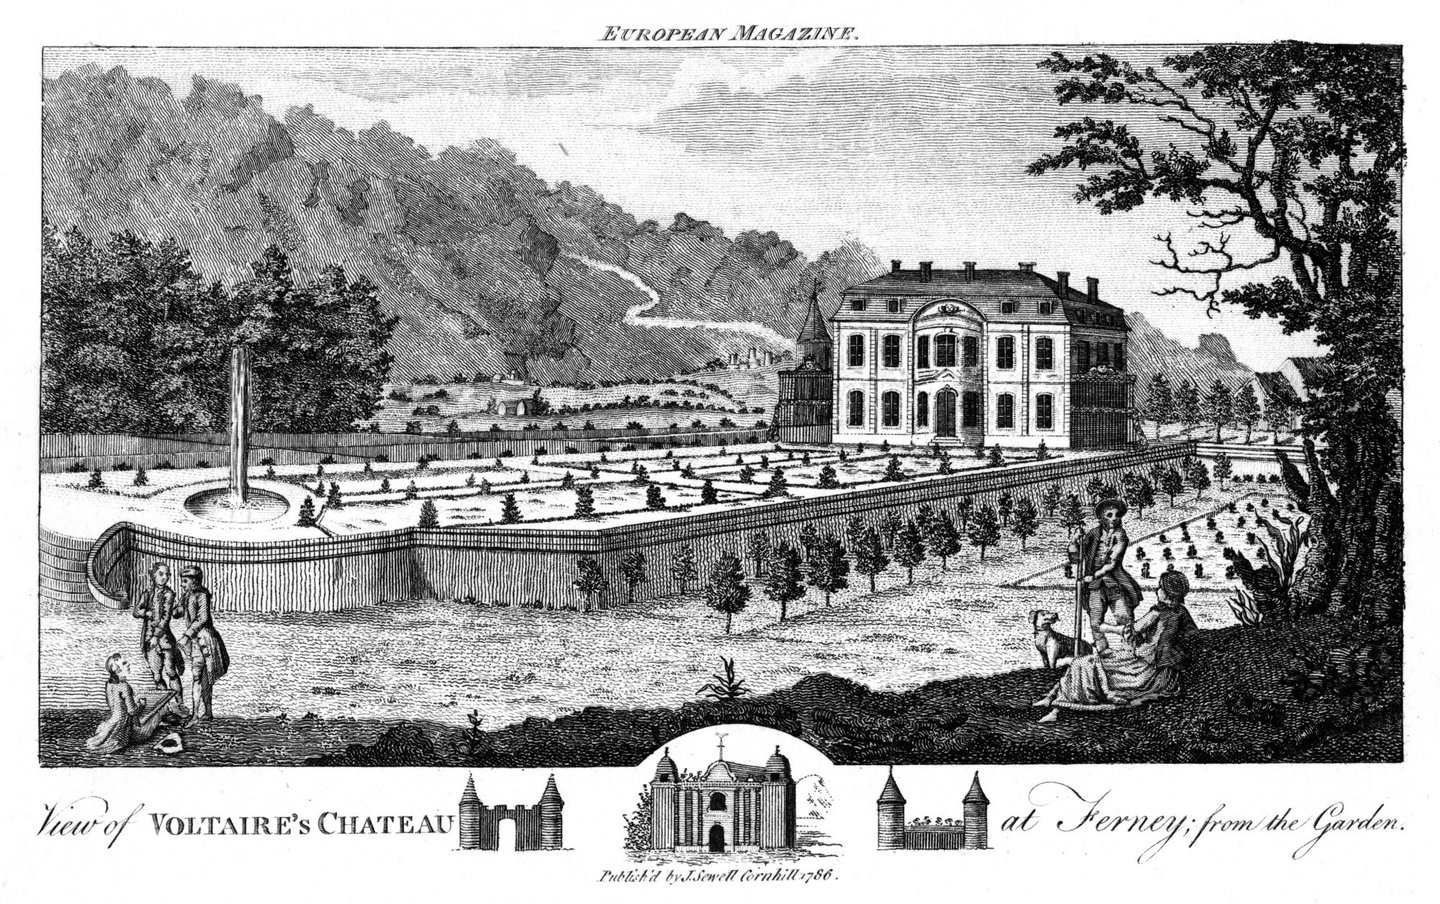 Ferney near Geneva, Switzerland, 1786. The chateau where Francois Marie Arouet de Voltaire (1694-1778), French writer and embodiment of the Enlightenment, settled after 1758, viewed from the garden. From The European Magazine, (London, 1786). (Photo by Ann Ronan Pictures/Print Collector/Getty Images)